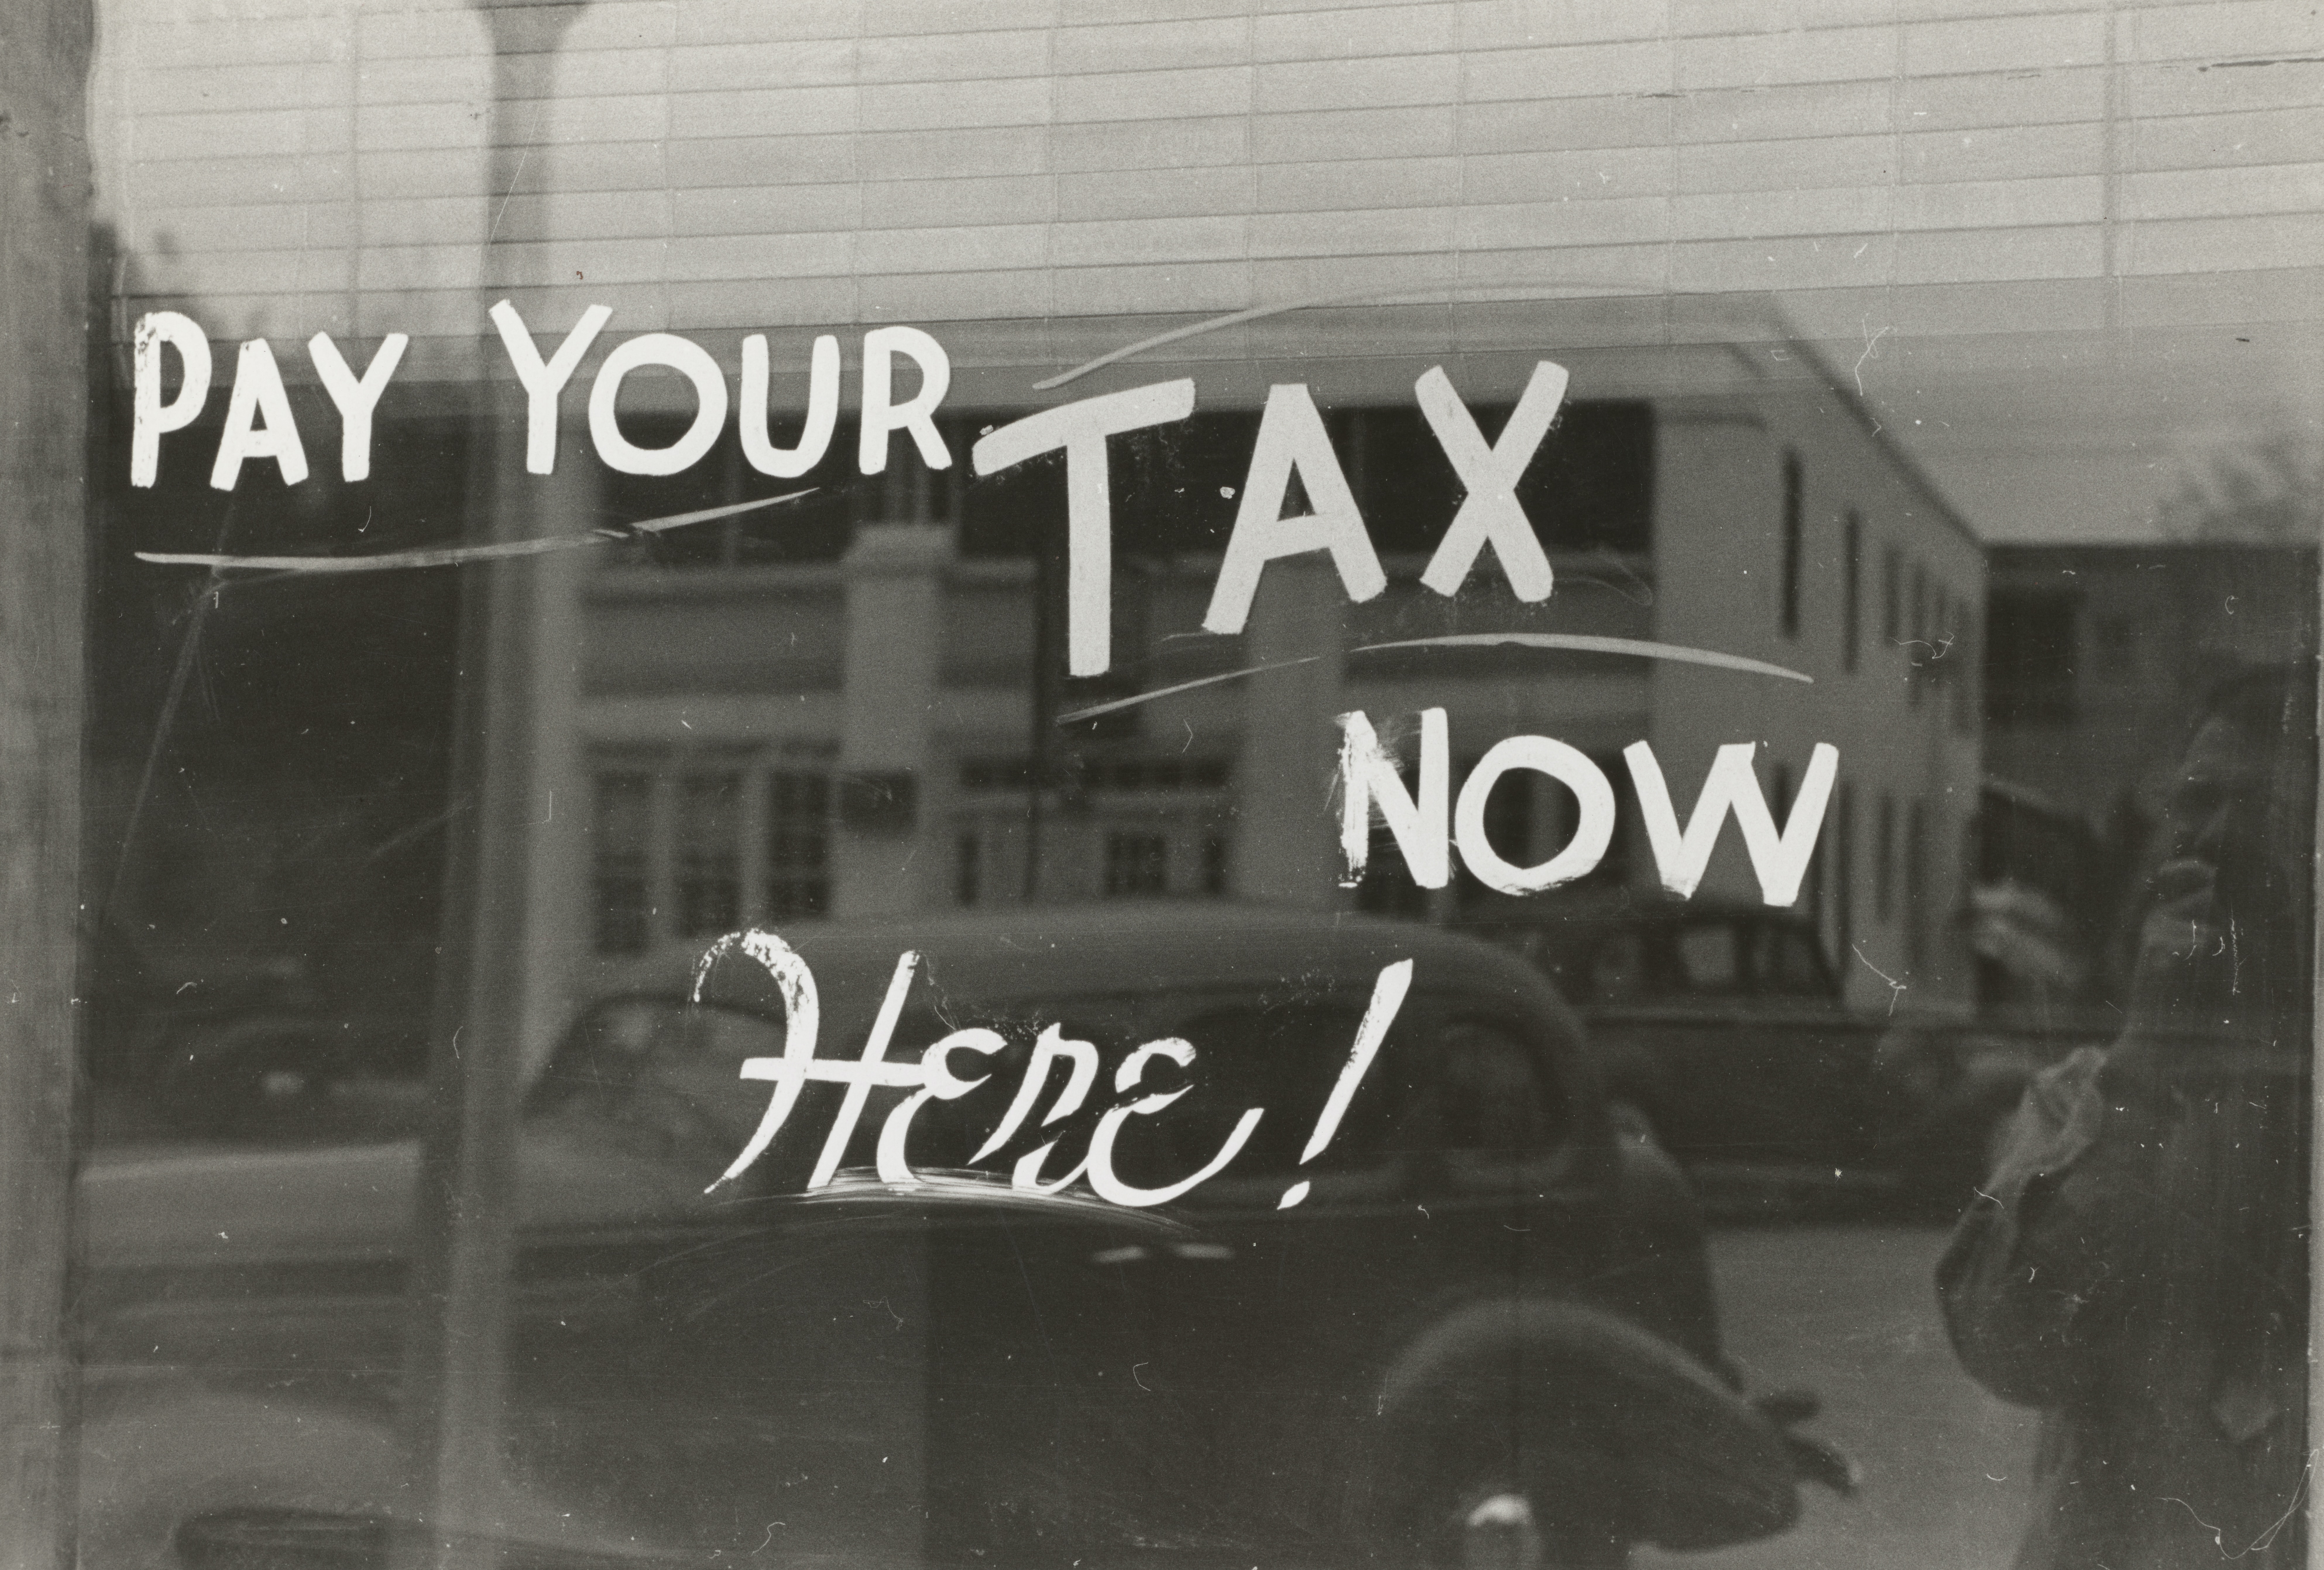 Pay your taxes here